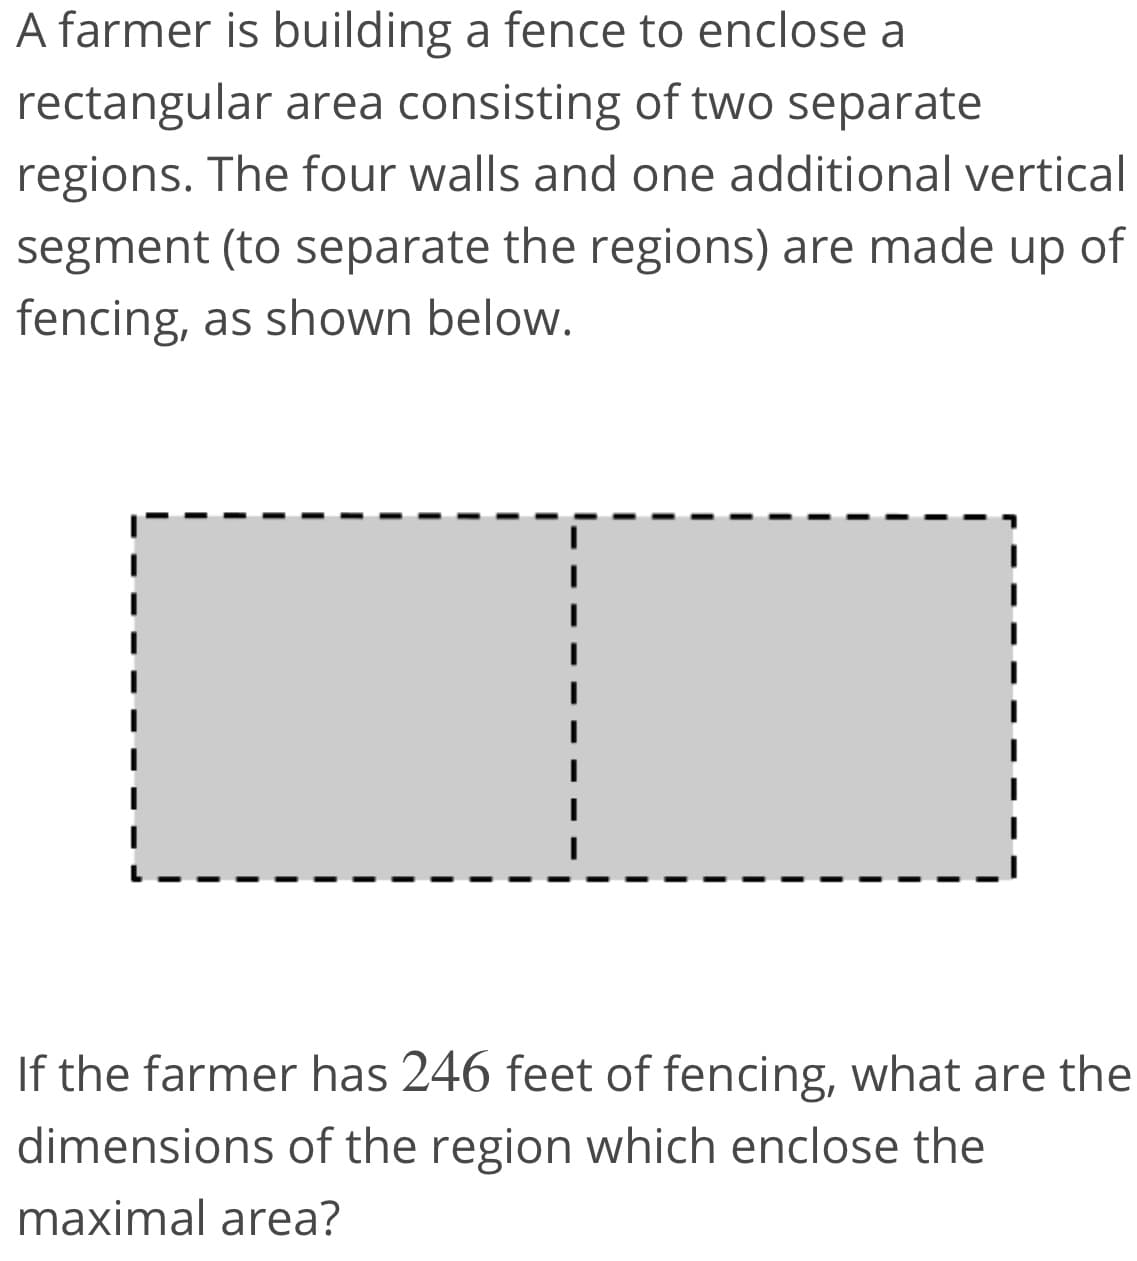 A farmer is building a fence to enclose a
rectangular area consisting of two separate
regions. The four walls and one additional vertical
segment (to separate the regions) are made up of
fencing, as shown below.
If the farmer has 246 feet of fencing, what are the
dimensions of the region which enclose the
maximal area?
